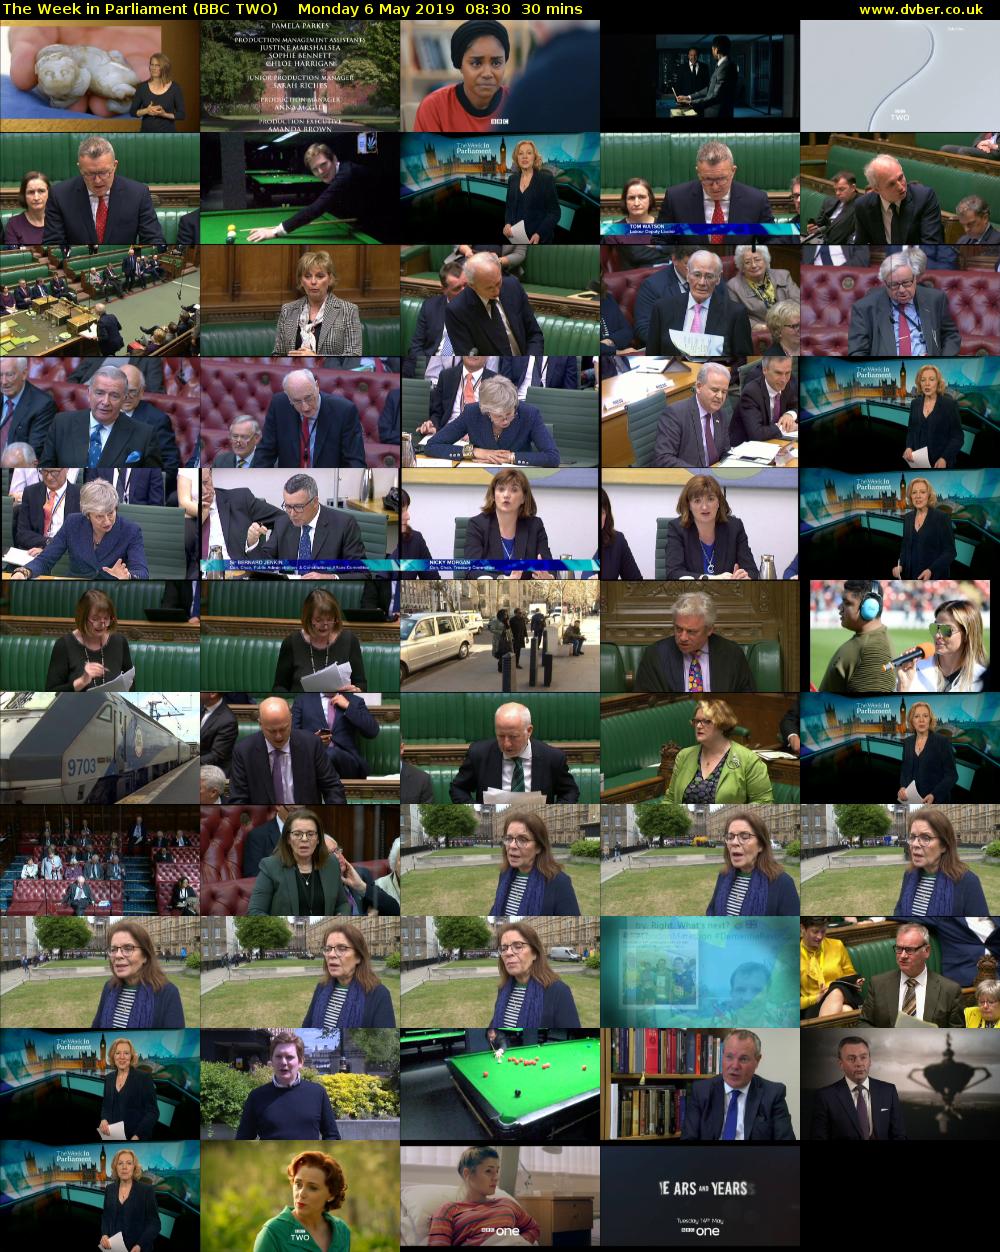 The Week in Parliament (BBC TWO) Monday 6 May 2019 08:30 - 09:00